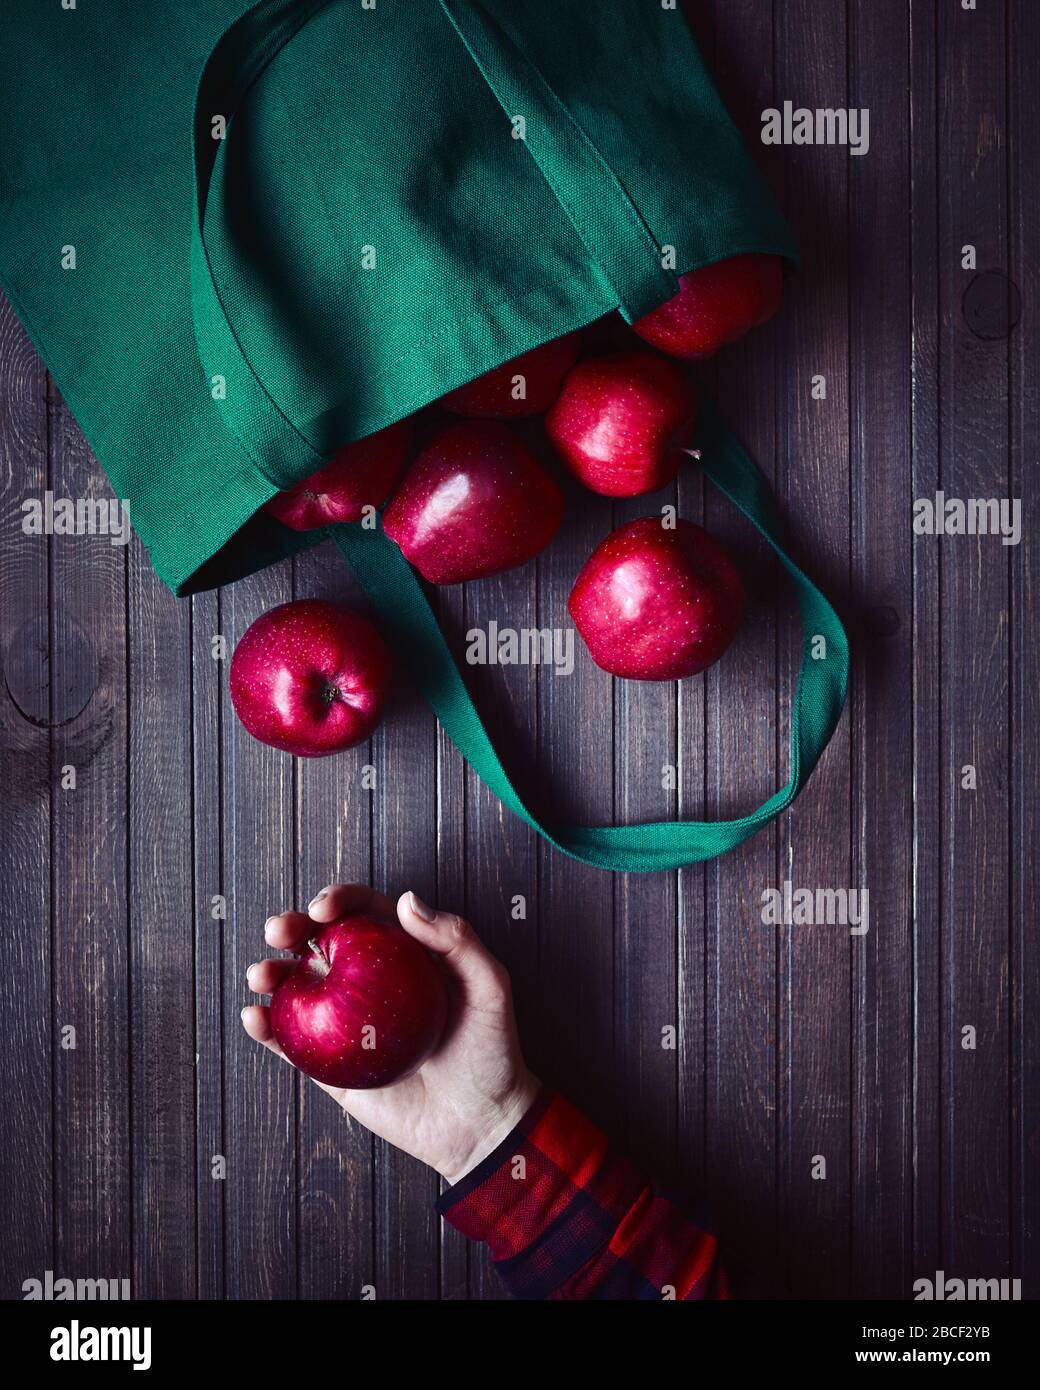 Online shopping delivery. Eco friendly bag with red apples. Woman holding apple on dark wooden background Stock Photo